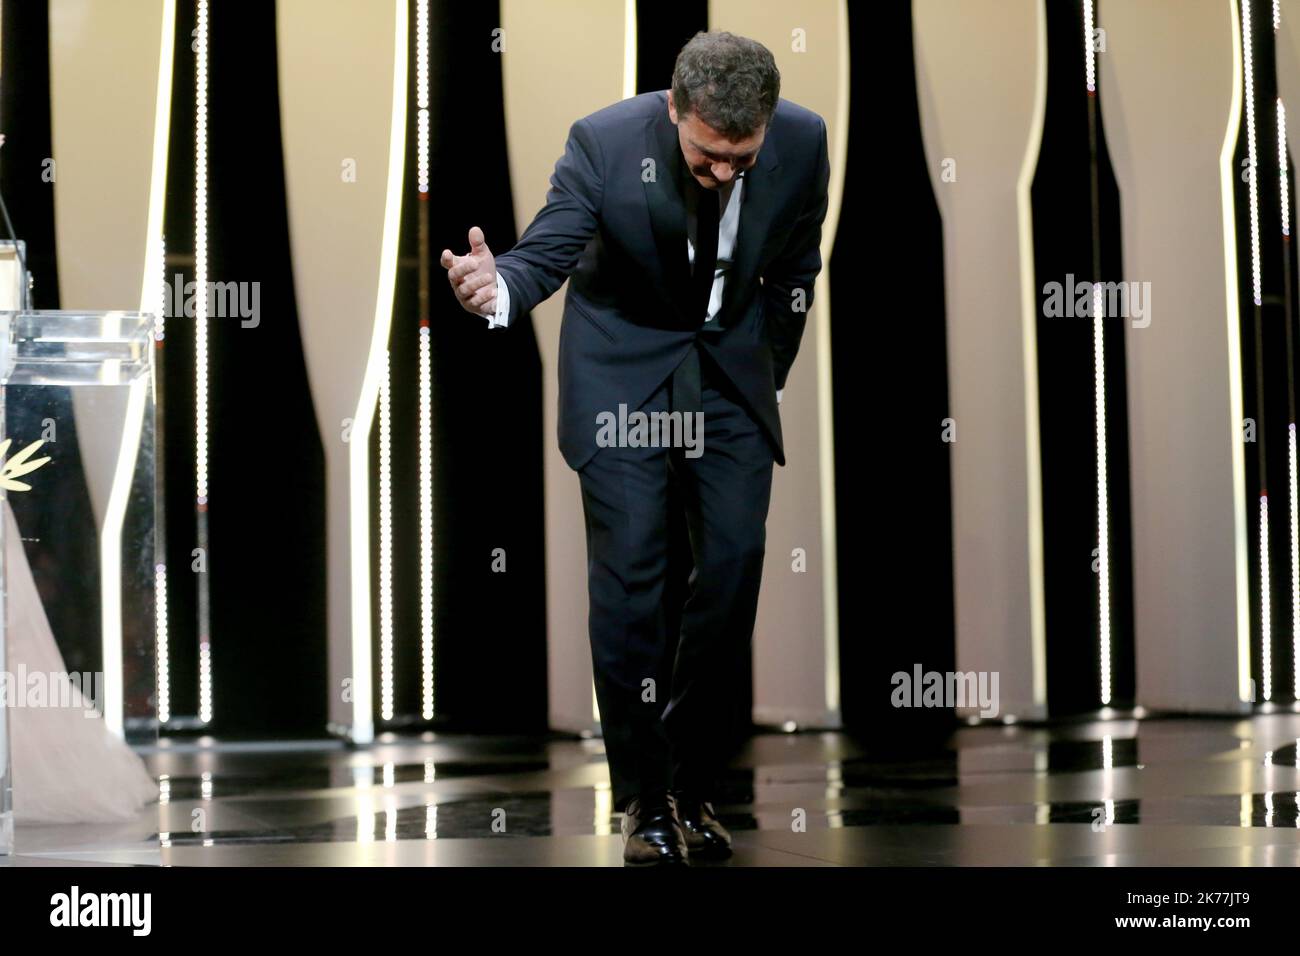 Antonio Banderas on stage after winning Best Actor Prize for his part in 'Dolor Y Gloria (Pain and Glory) Stock Photo